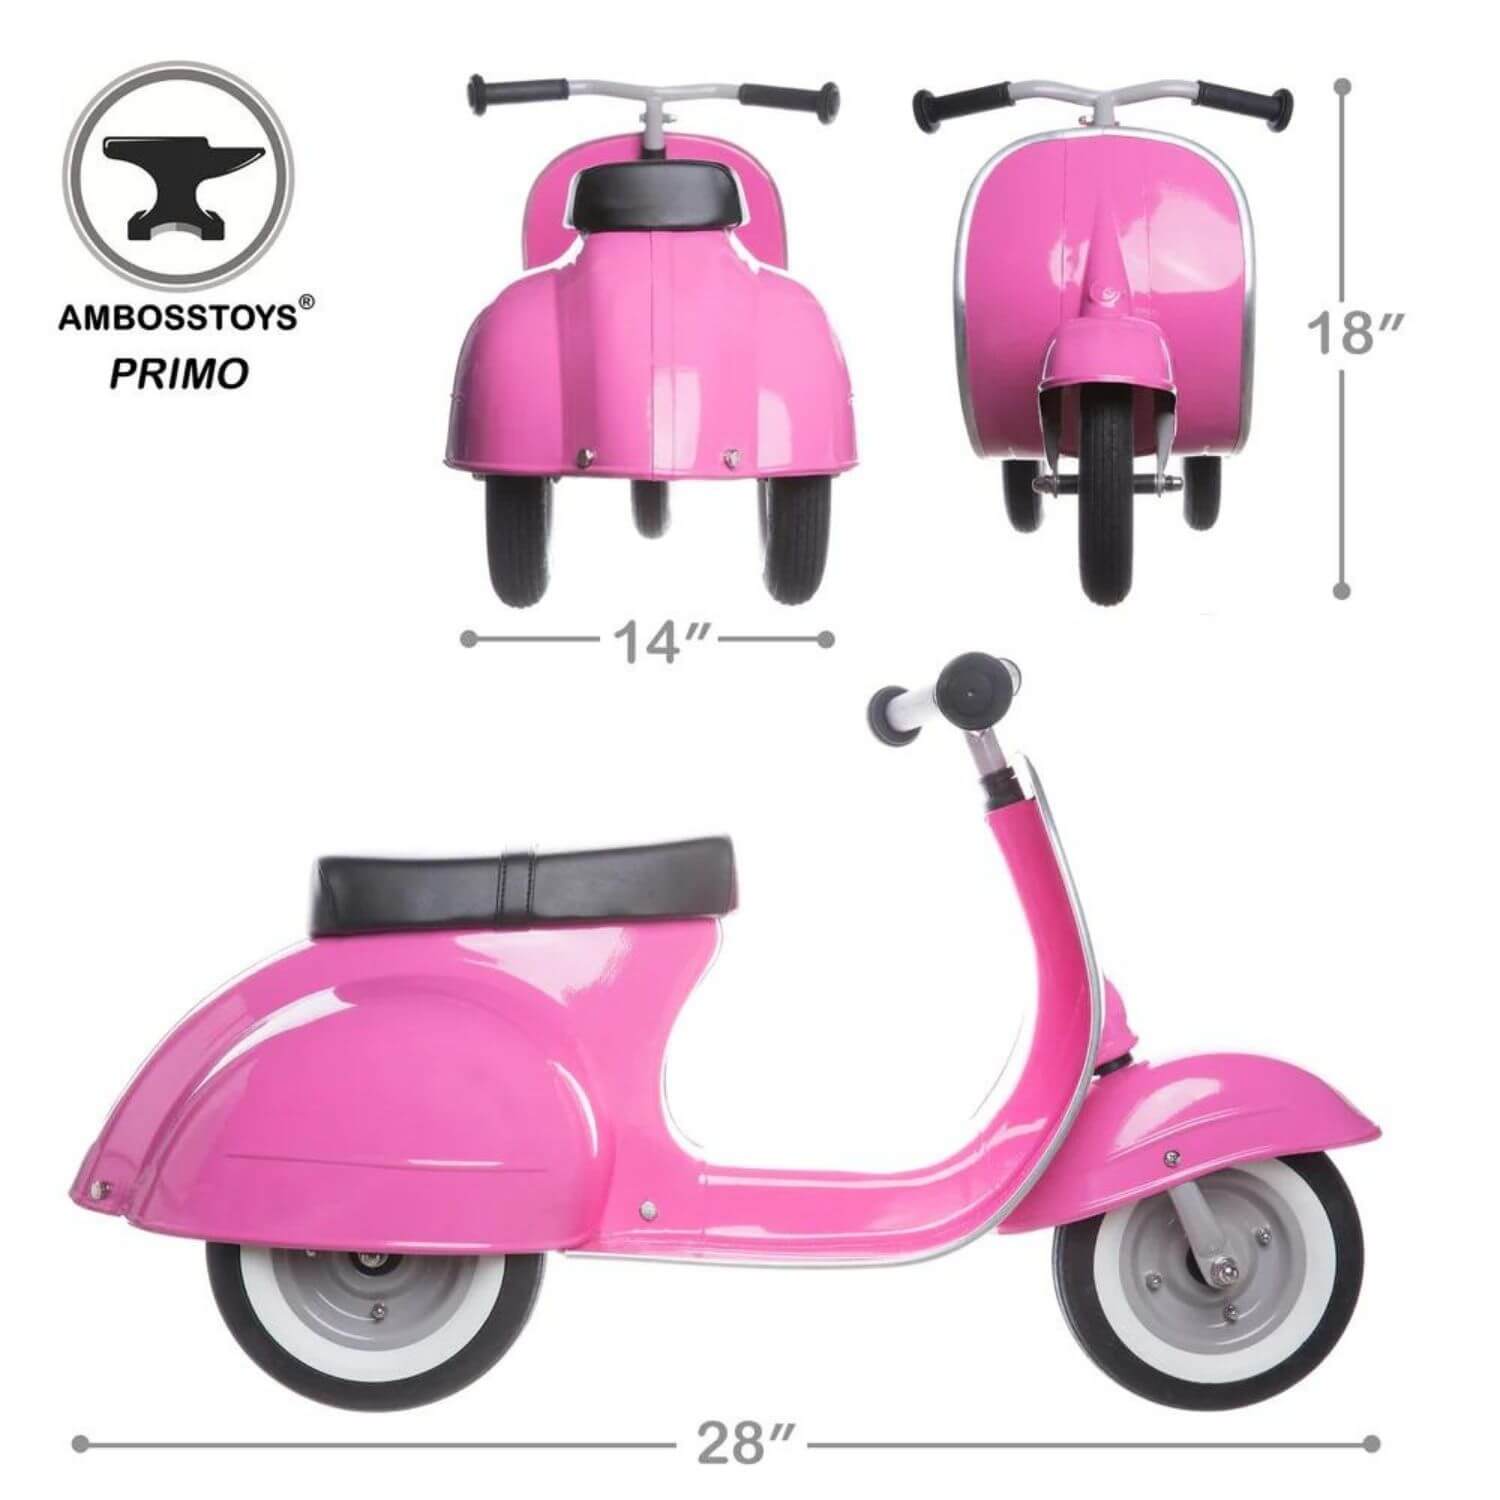 Primo Classic Ride-On Scooter Pink - Dimensions